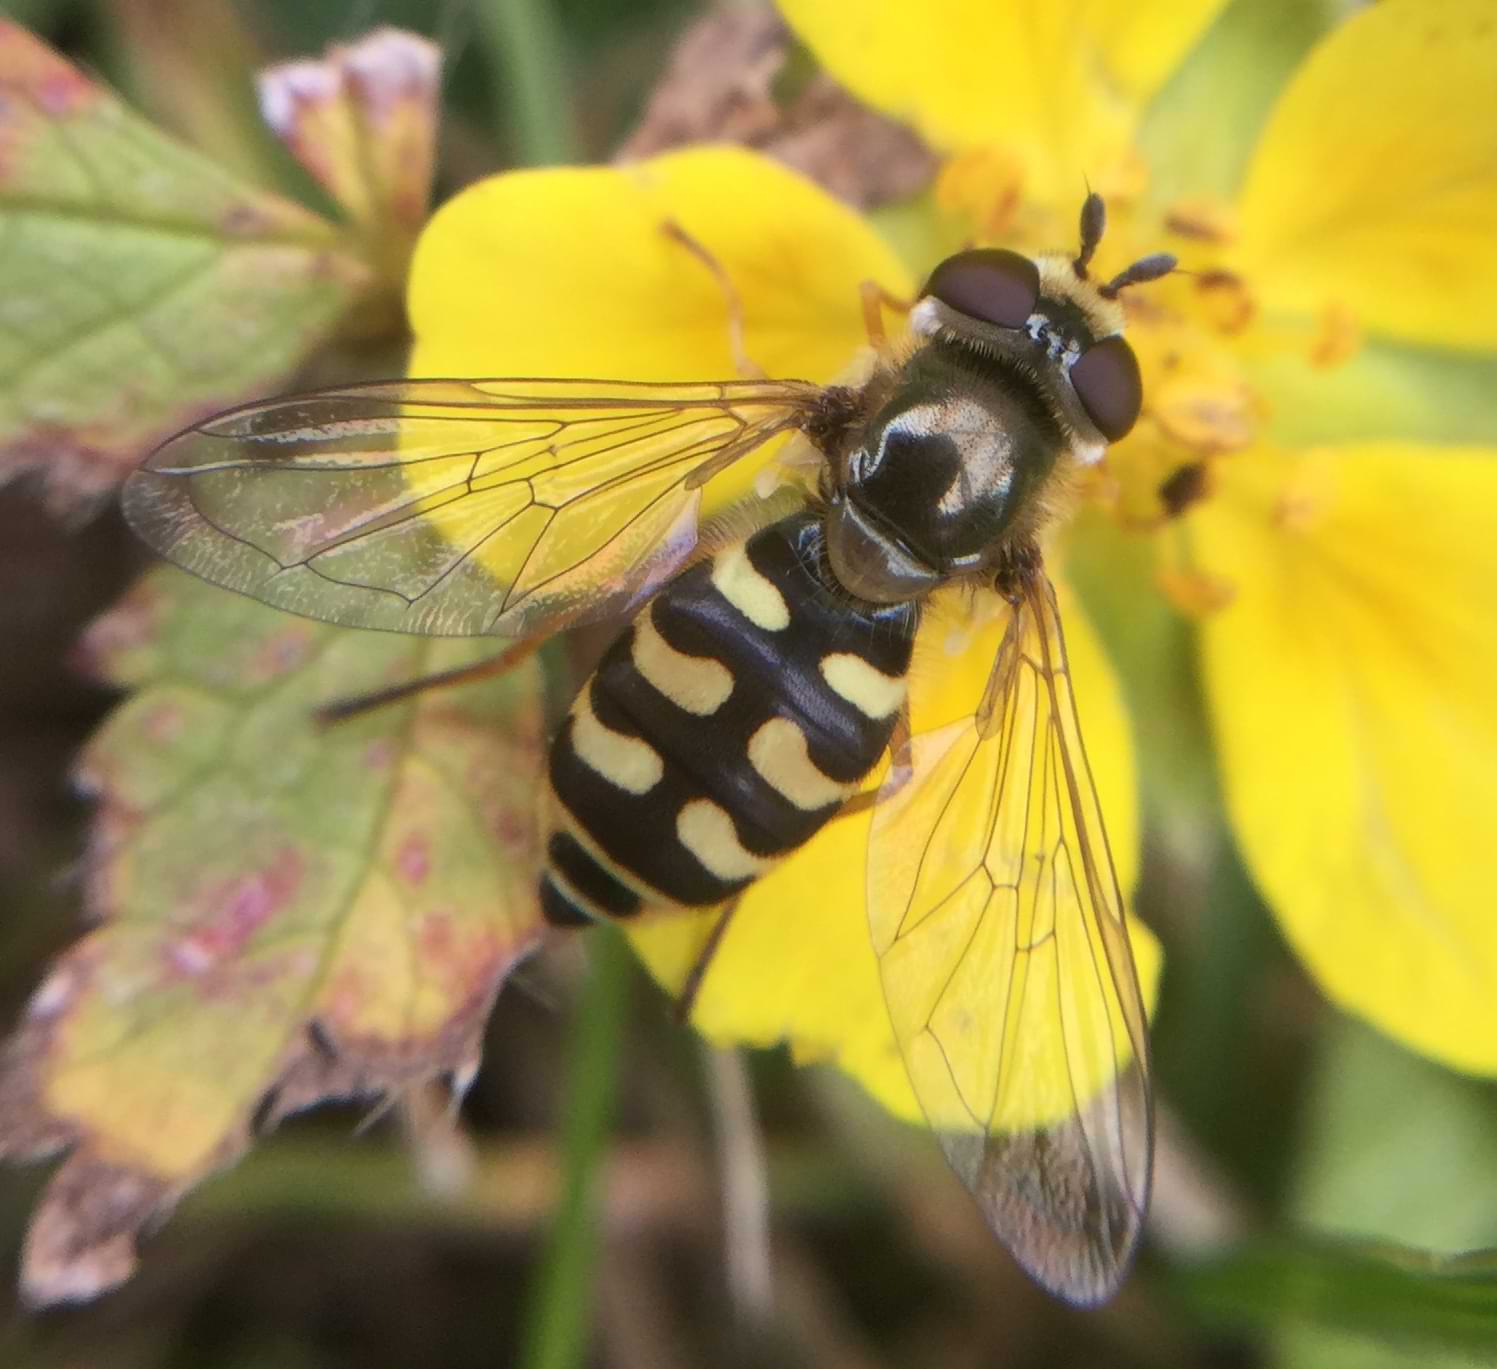 A small hoverfly feeding on a yellow flower. The fly's abdomen is mostly black but is lined with yellow shapes that resemble a comma.